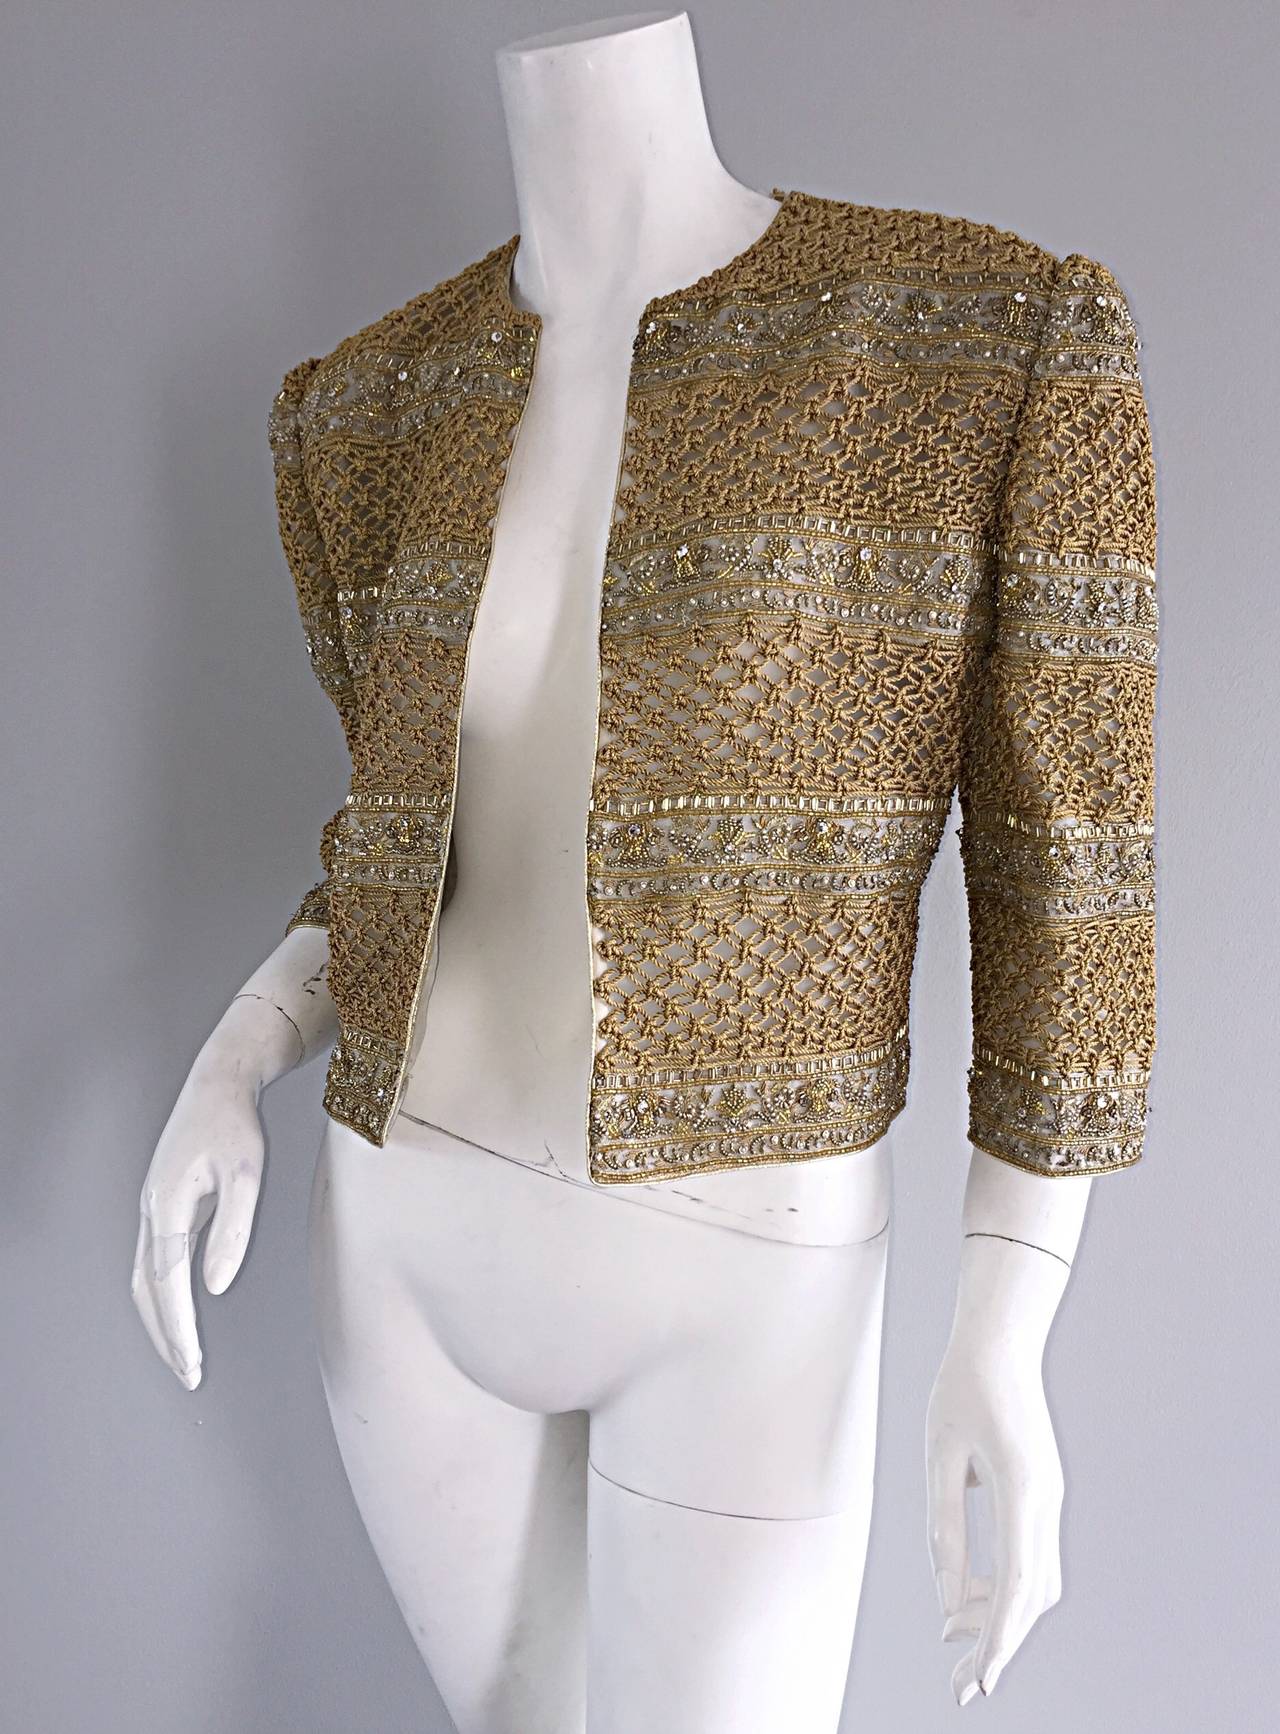 Incredible vintage Mary McFadden Couture gold threaded/beaded jacket! Words cannot even begin to describe the amount of work that was put into this couture piece! Gold handwoven thread detail, intermixed with beading and rhinestones throughout. Can